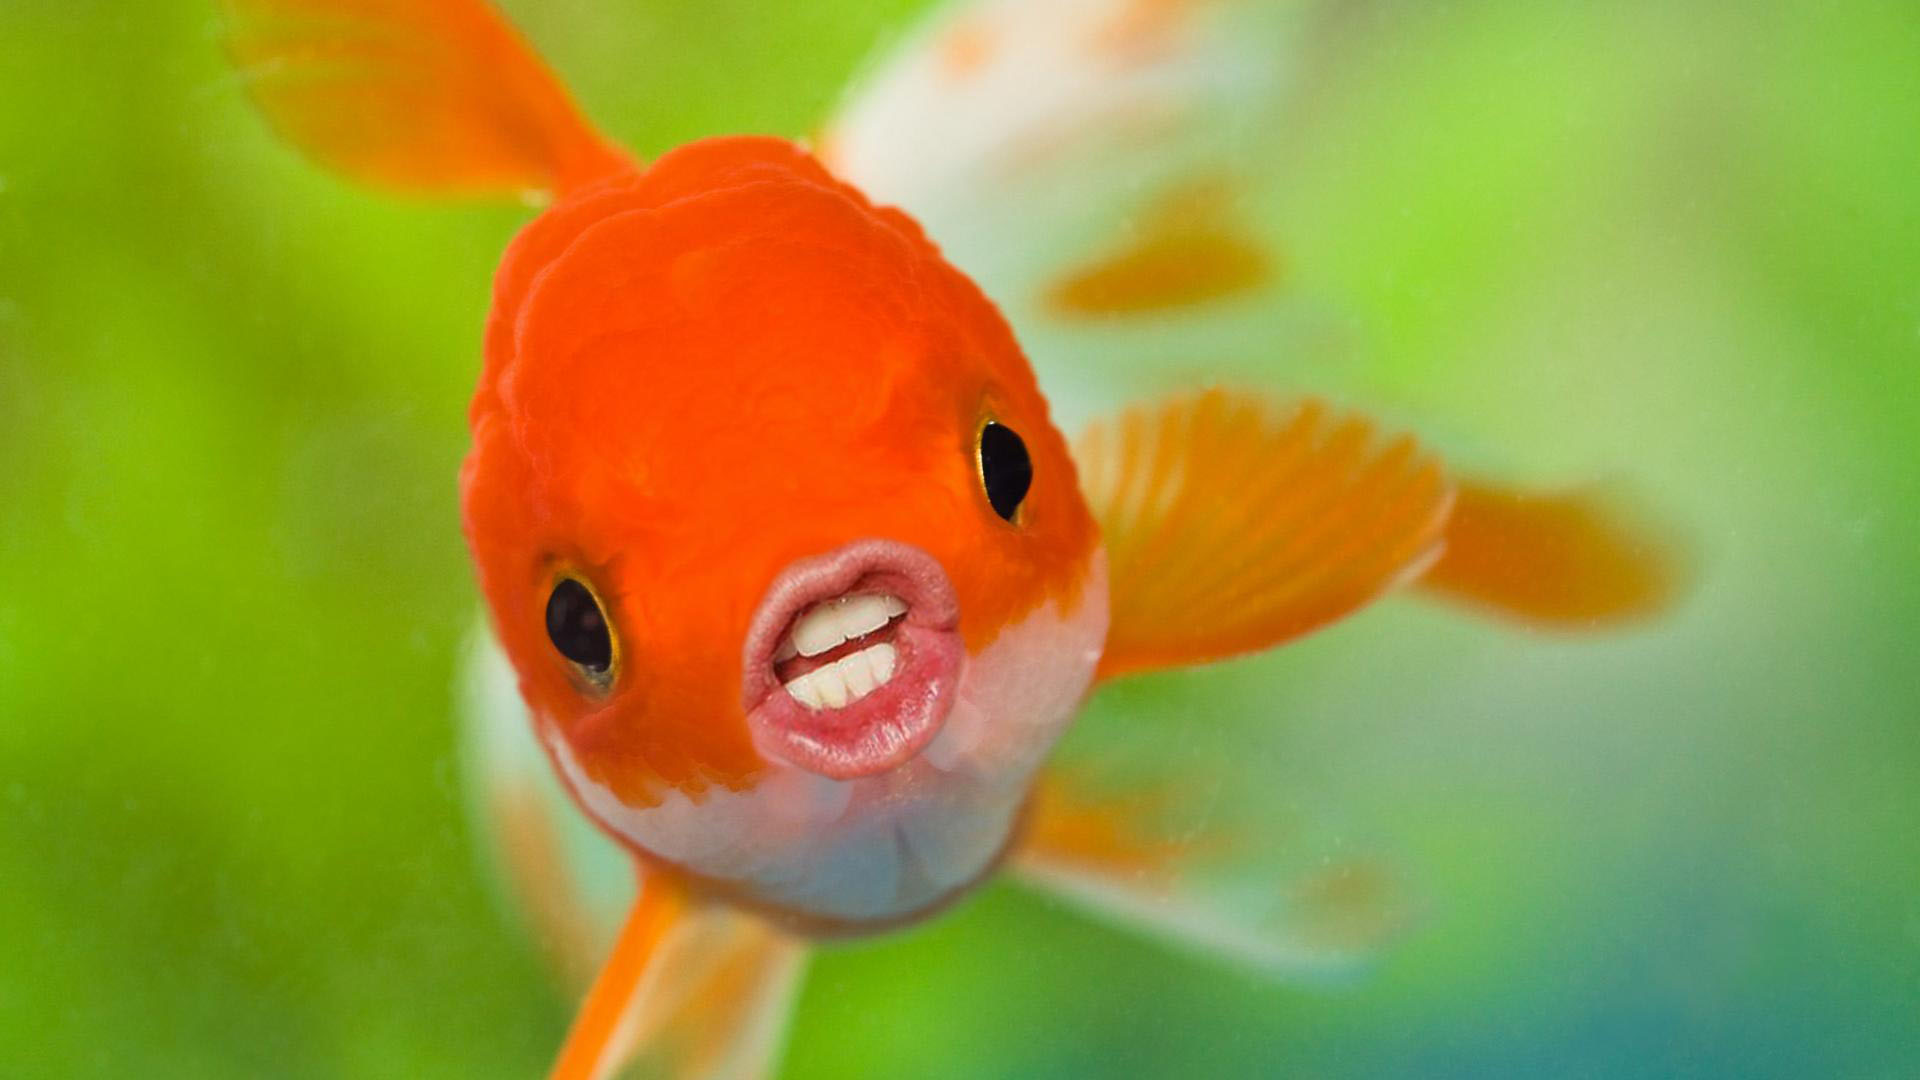 Added trumps face to a goldfish - Imgur